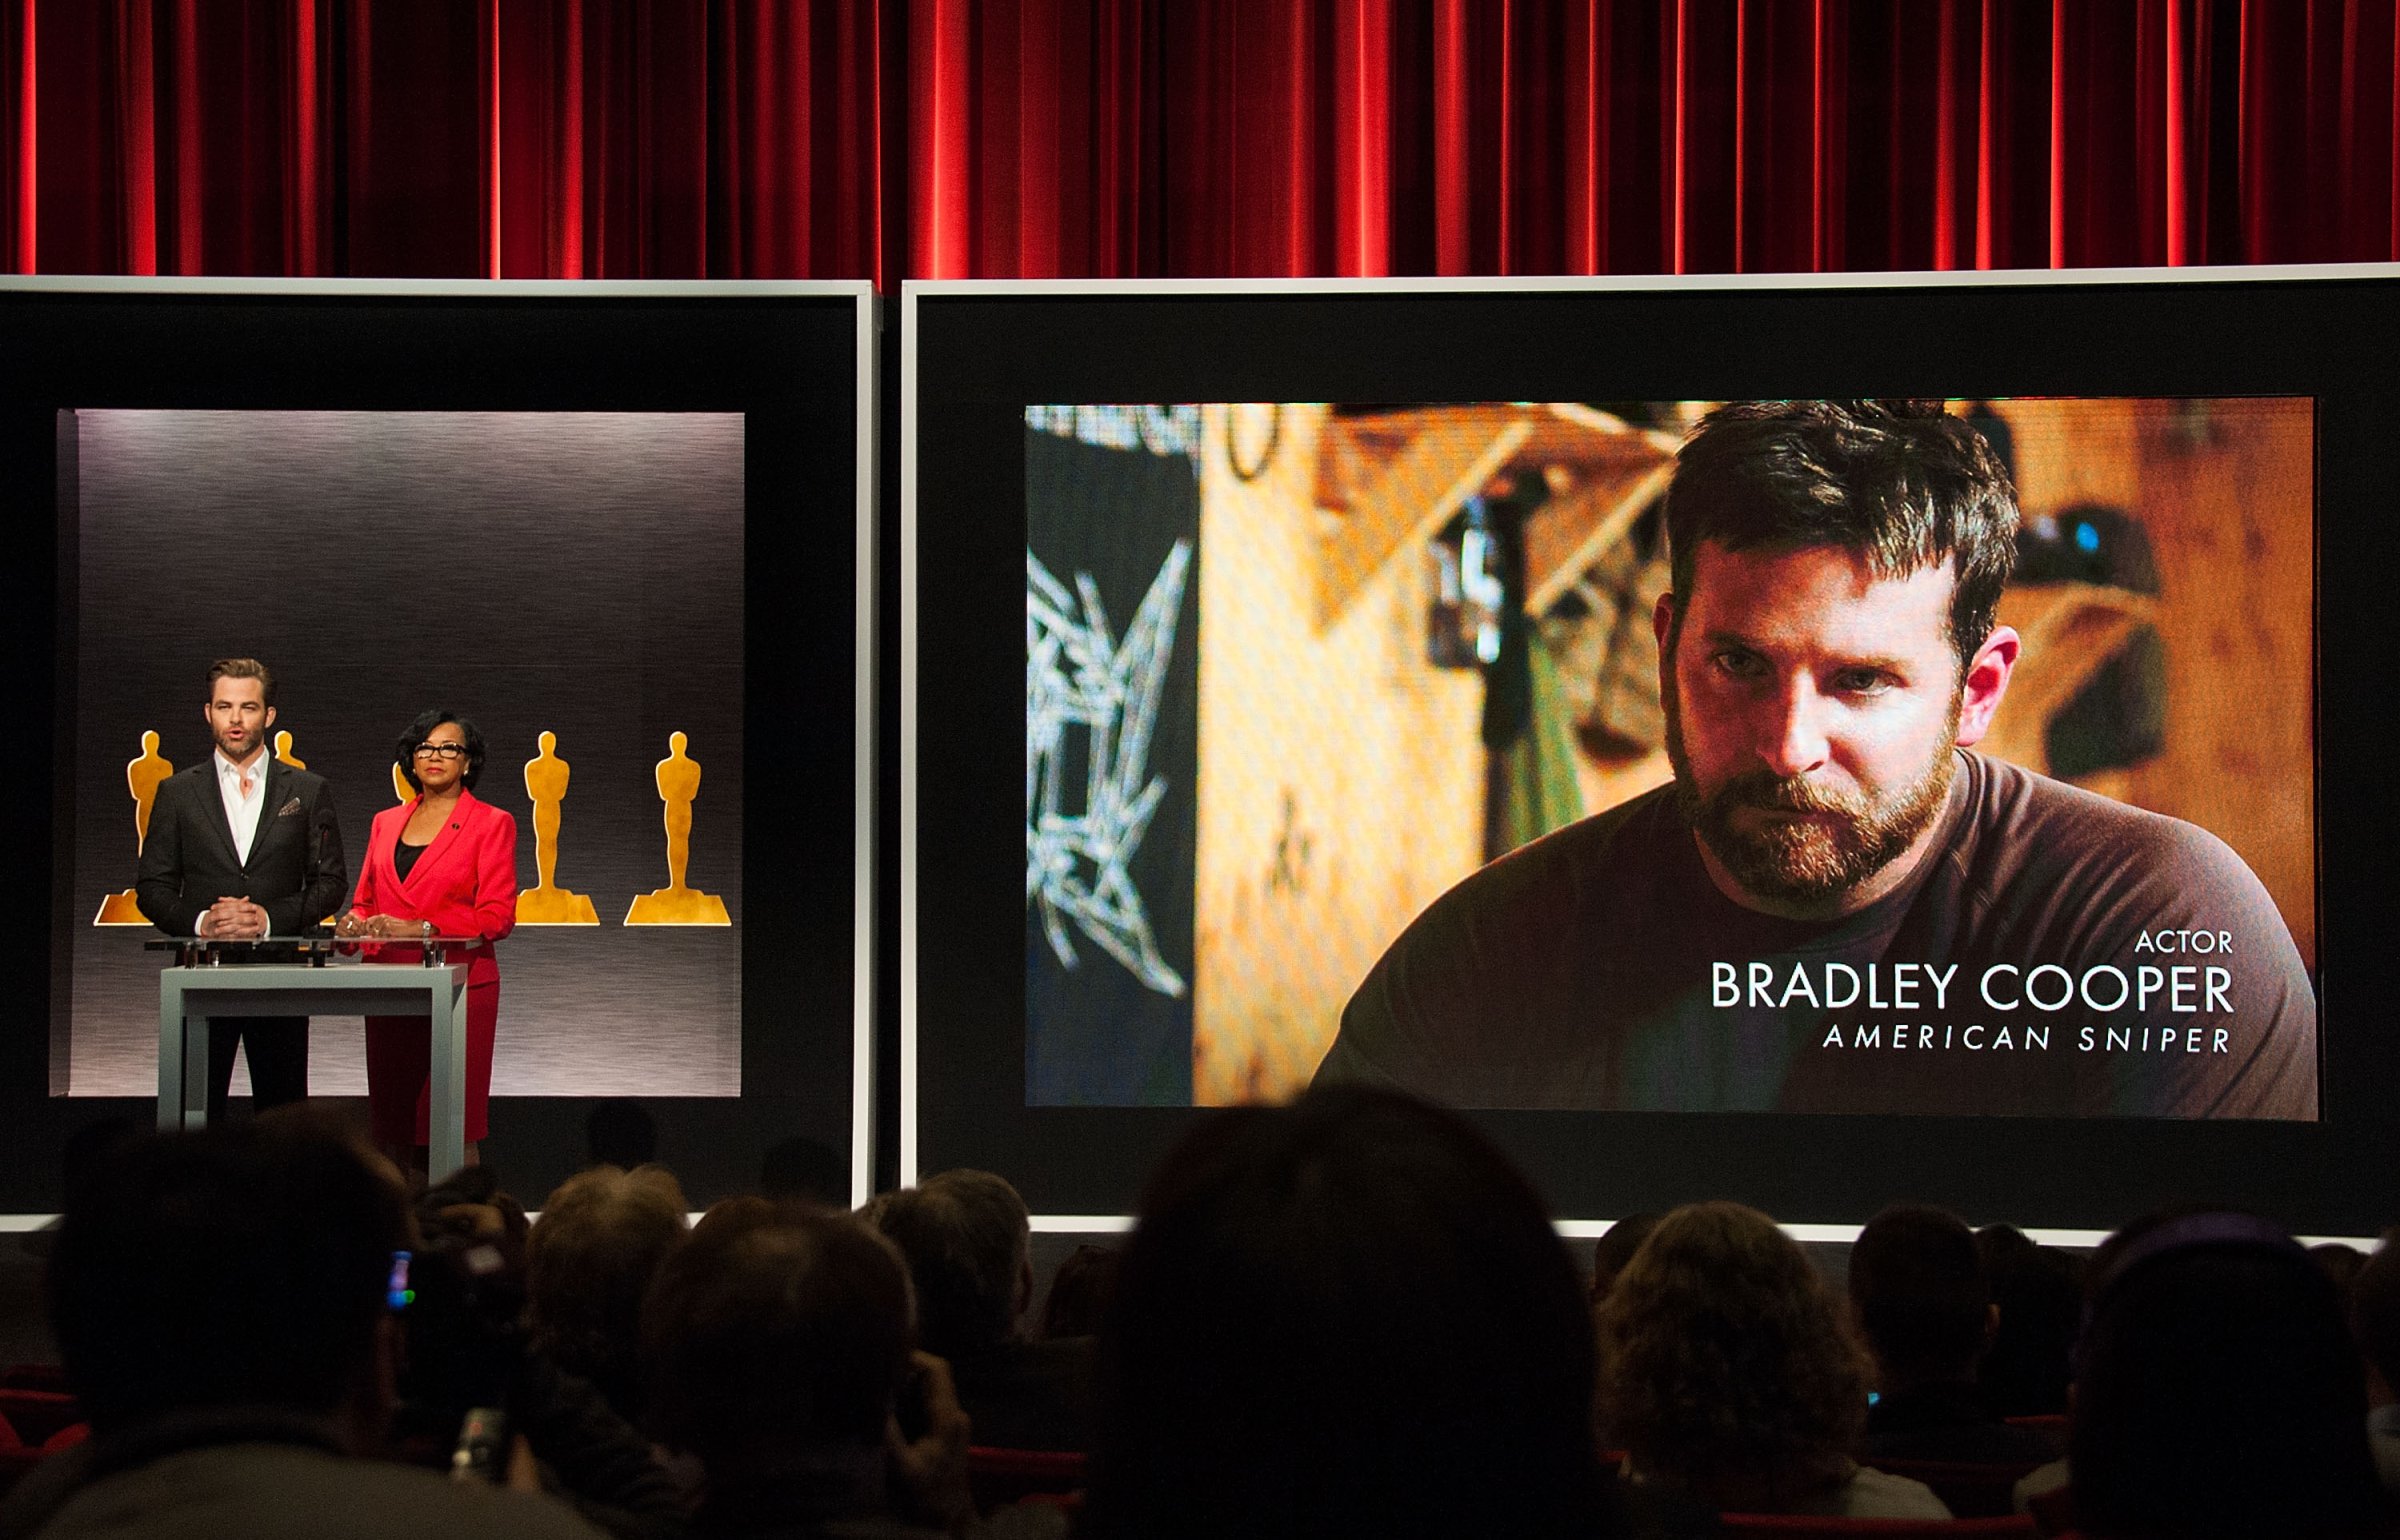 From left: Actor Chris Pine and Academy President Cheryl Boone Isaacs announce Bradley Cooper as a nominee for Best Actor in the film American Sniper at the 87th Academy Awards Nominations Announcement on Jan. 15, 2015 in Beverly Hills, California.